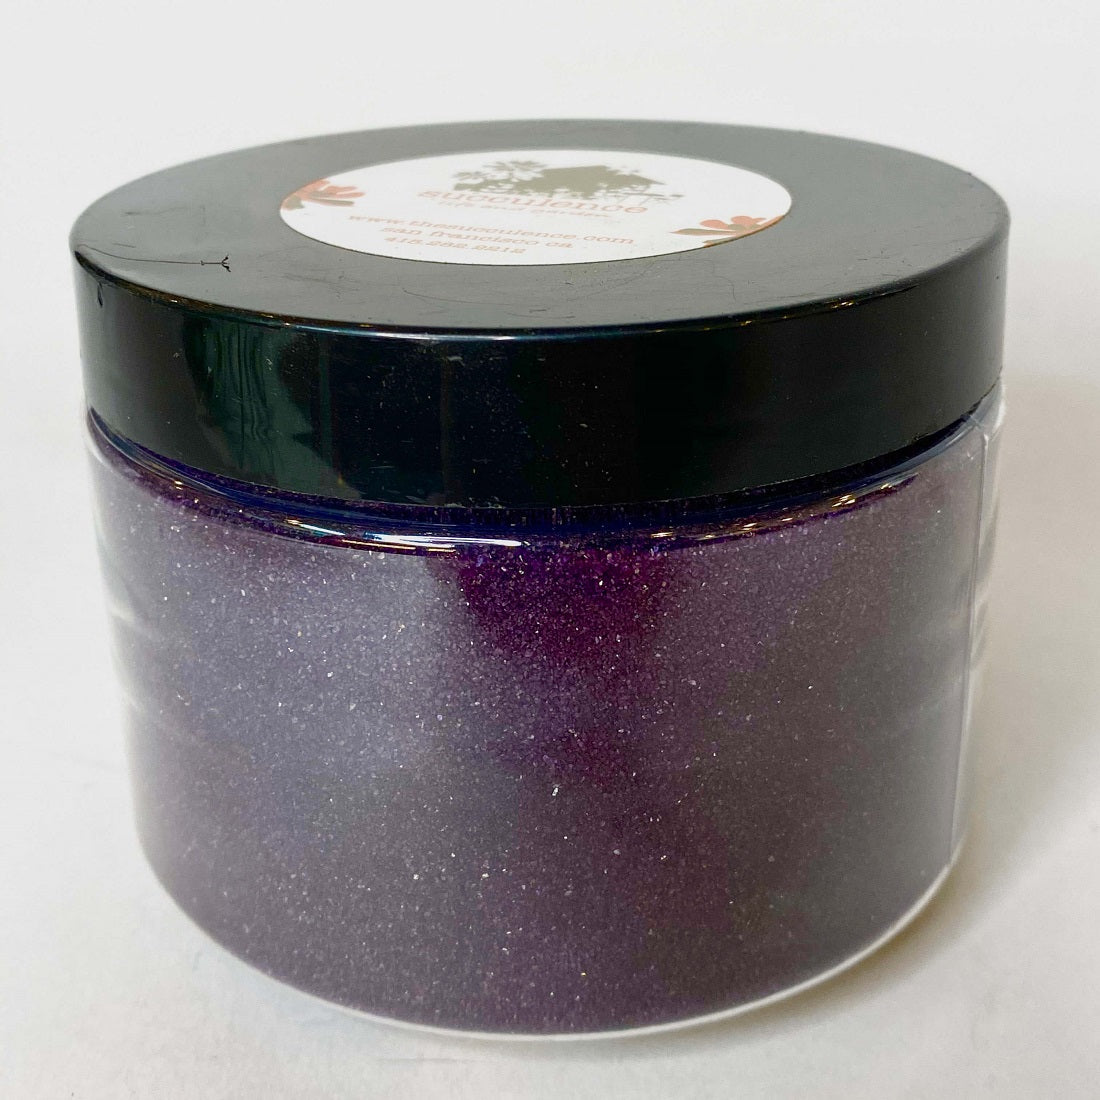 Eggplant Sand: a full, lidded jar holds a deep purple sand, which appears to be sparkling.